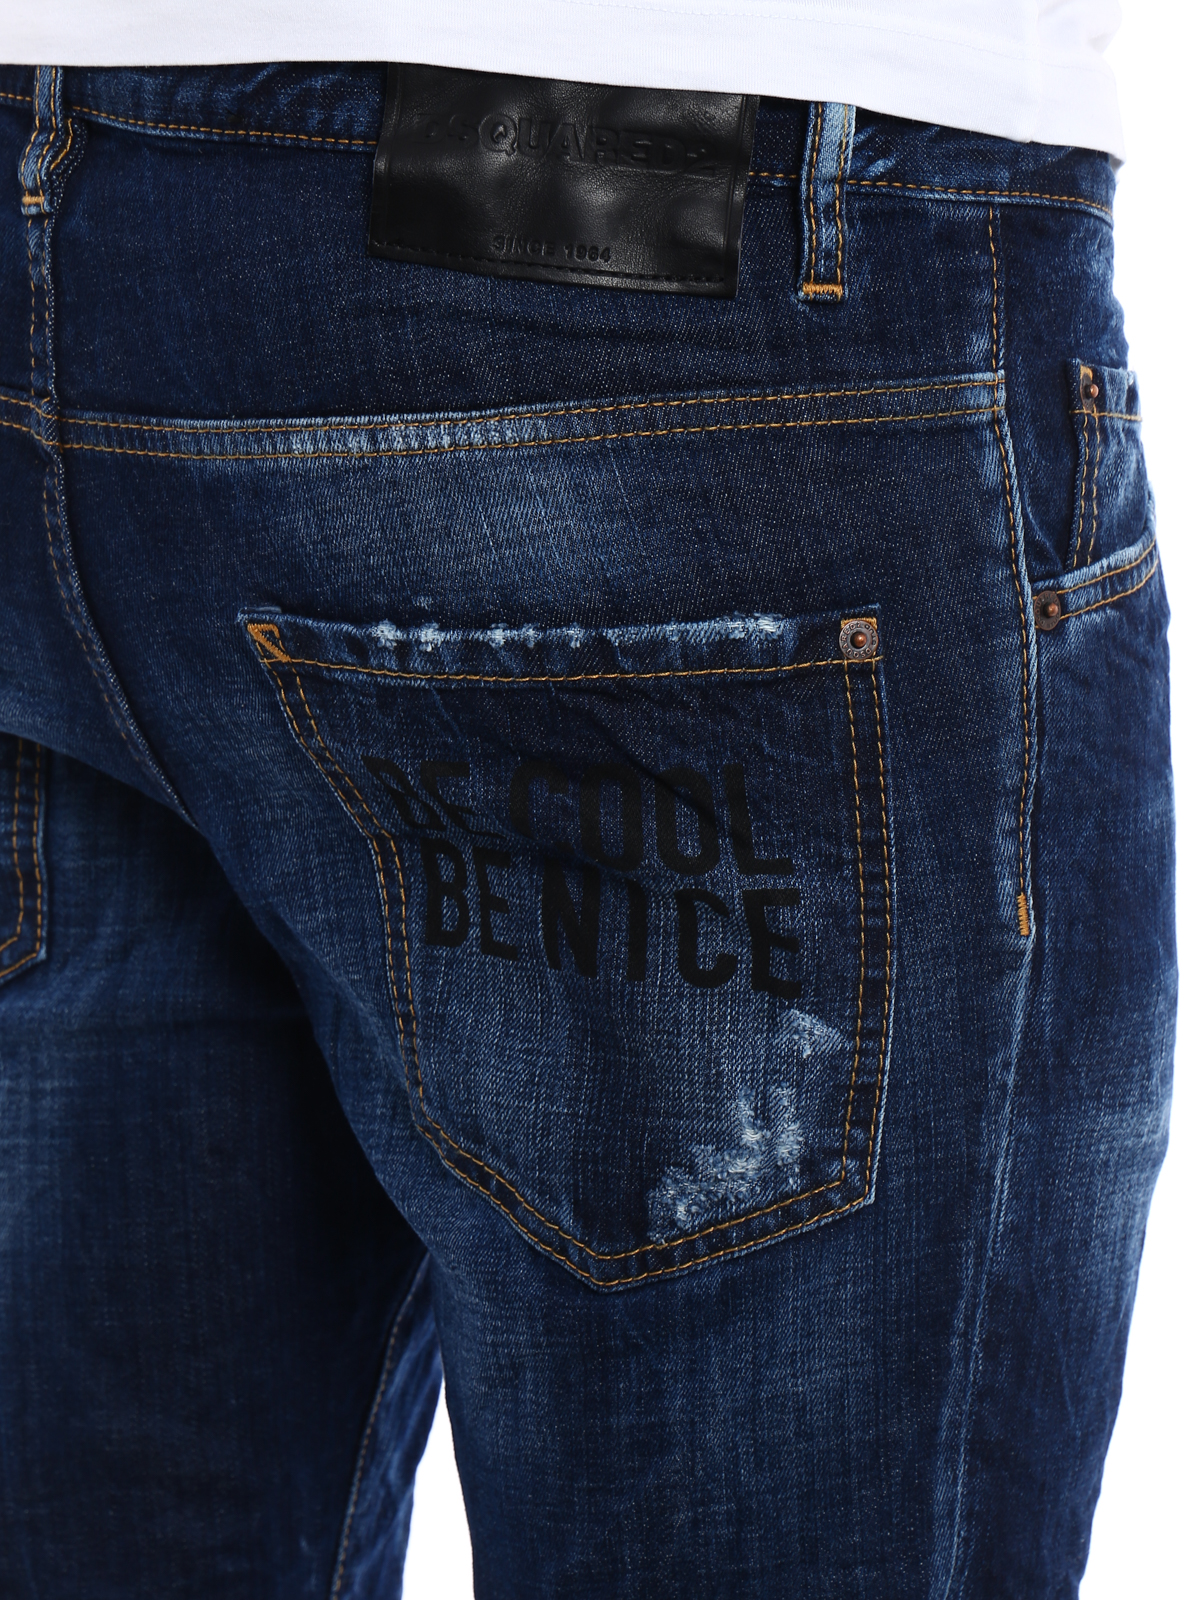 dsquared2 be cool be nice jeans